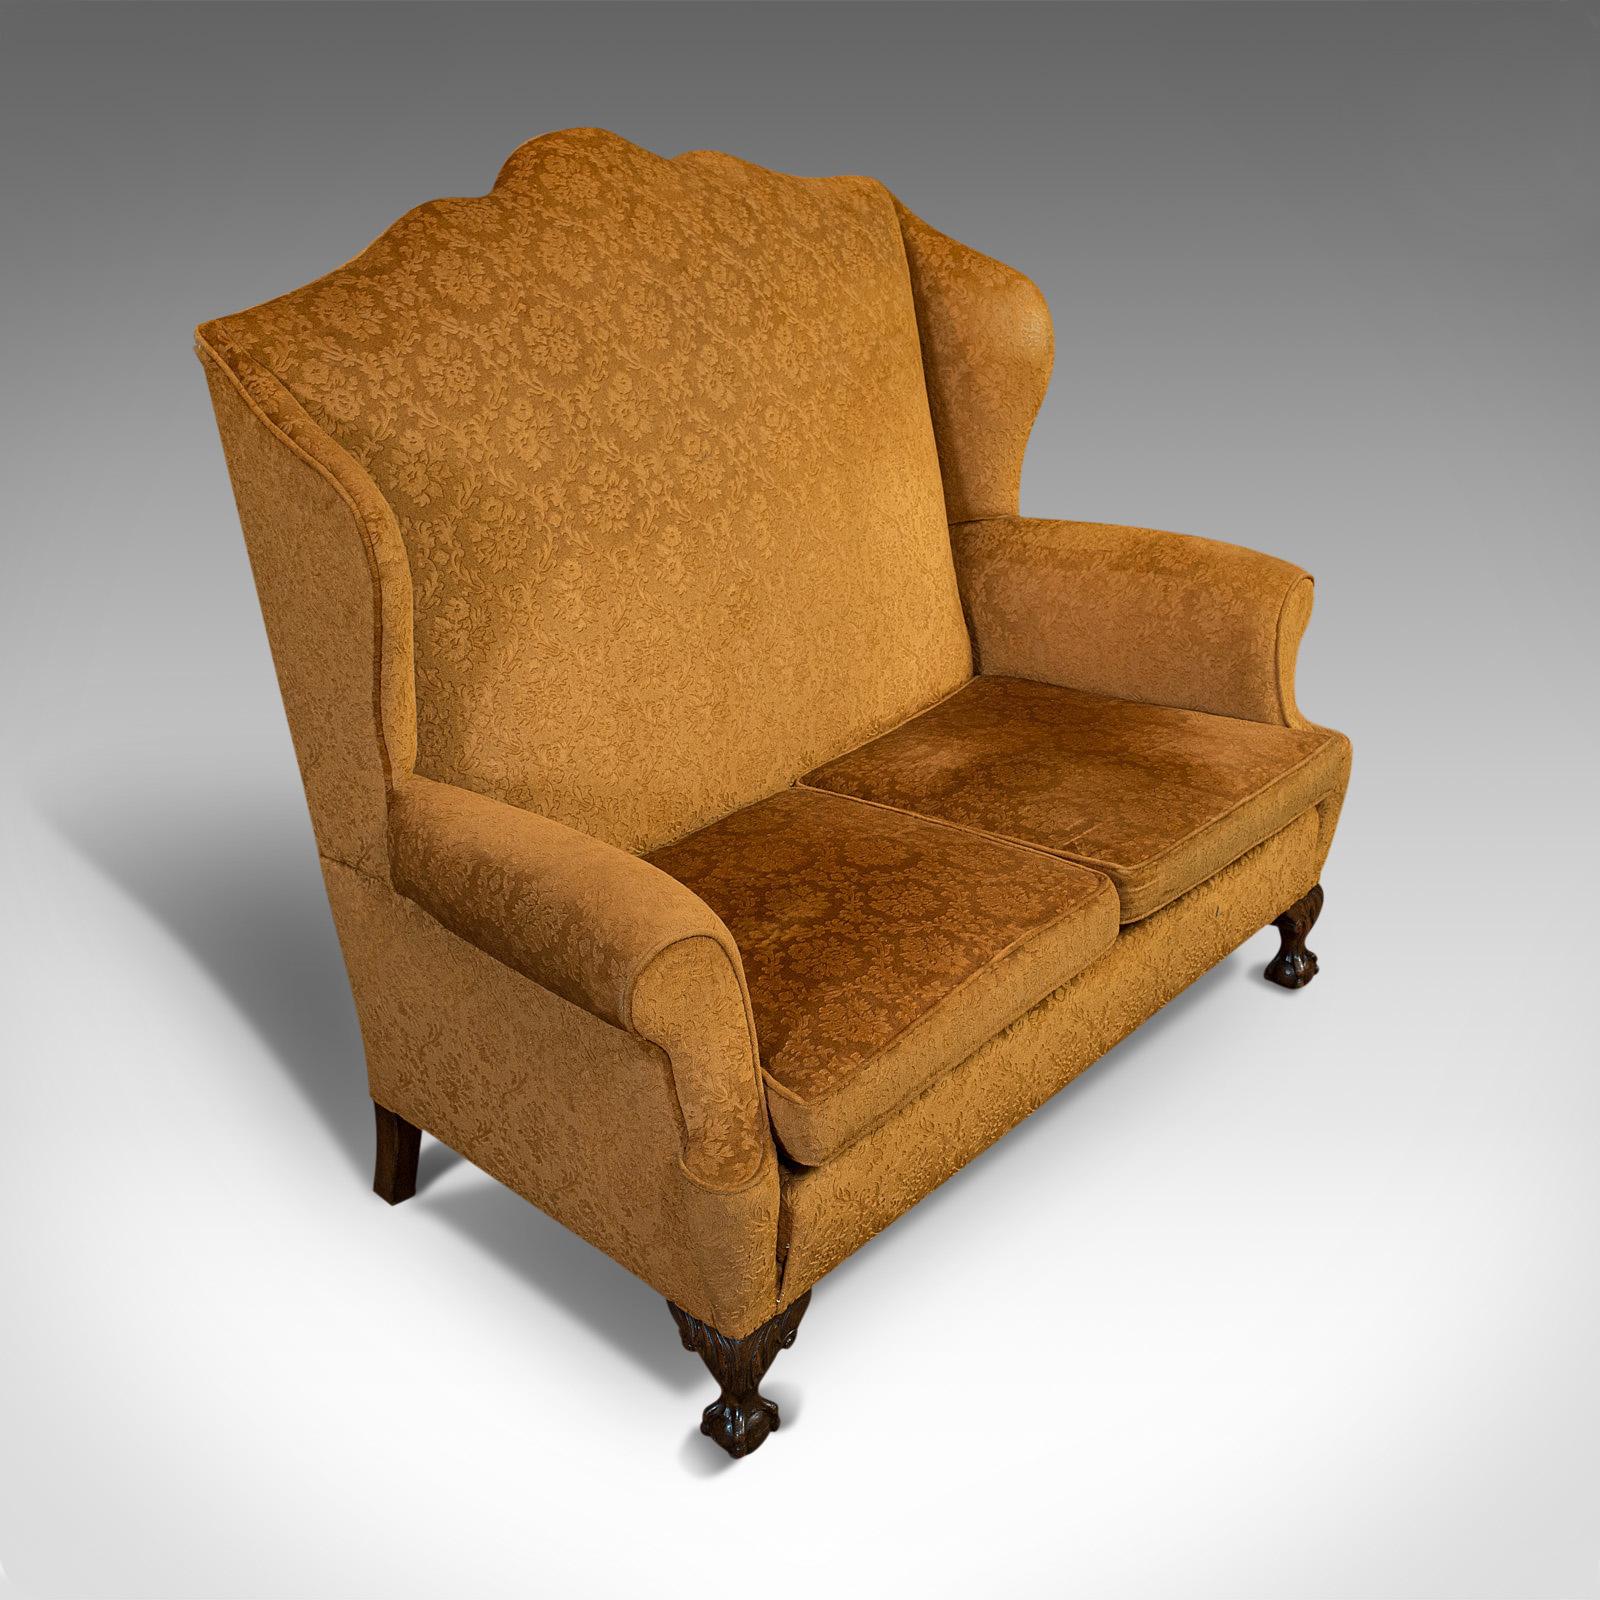 19th Century Antique Queen Anne Style Sofa, English, Two Seat Settee, Victorian, Circa 1880